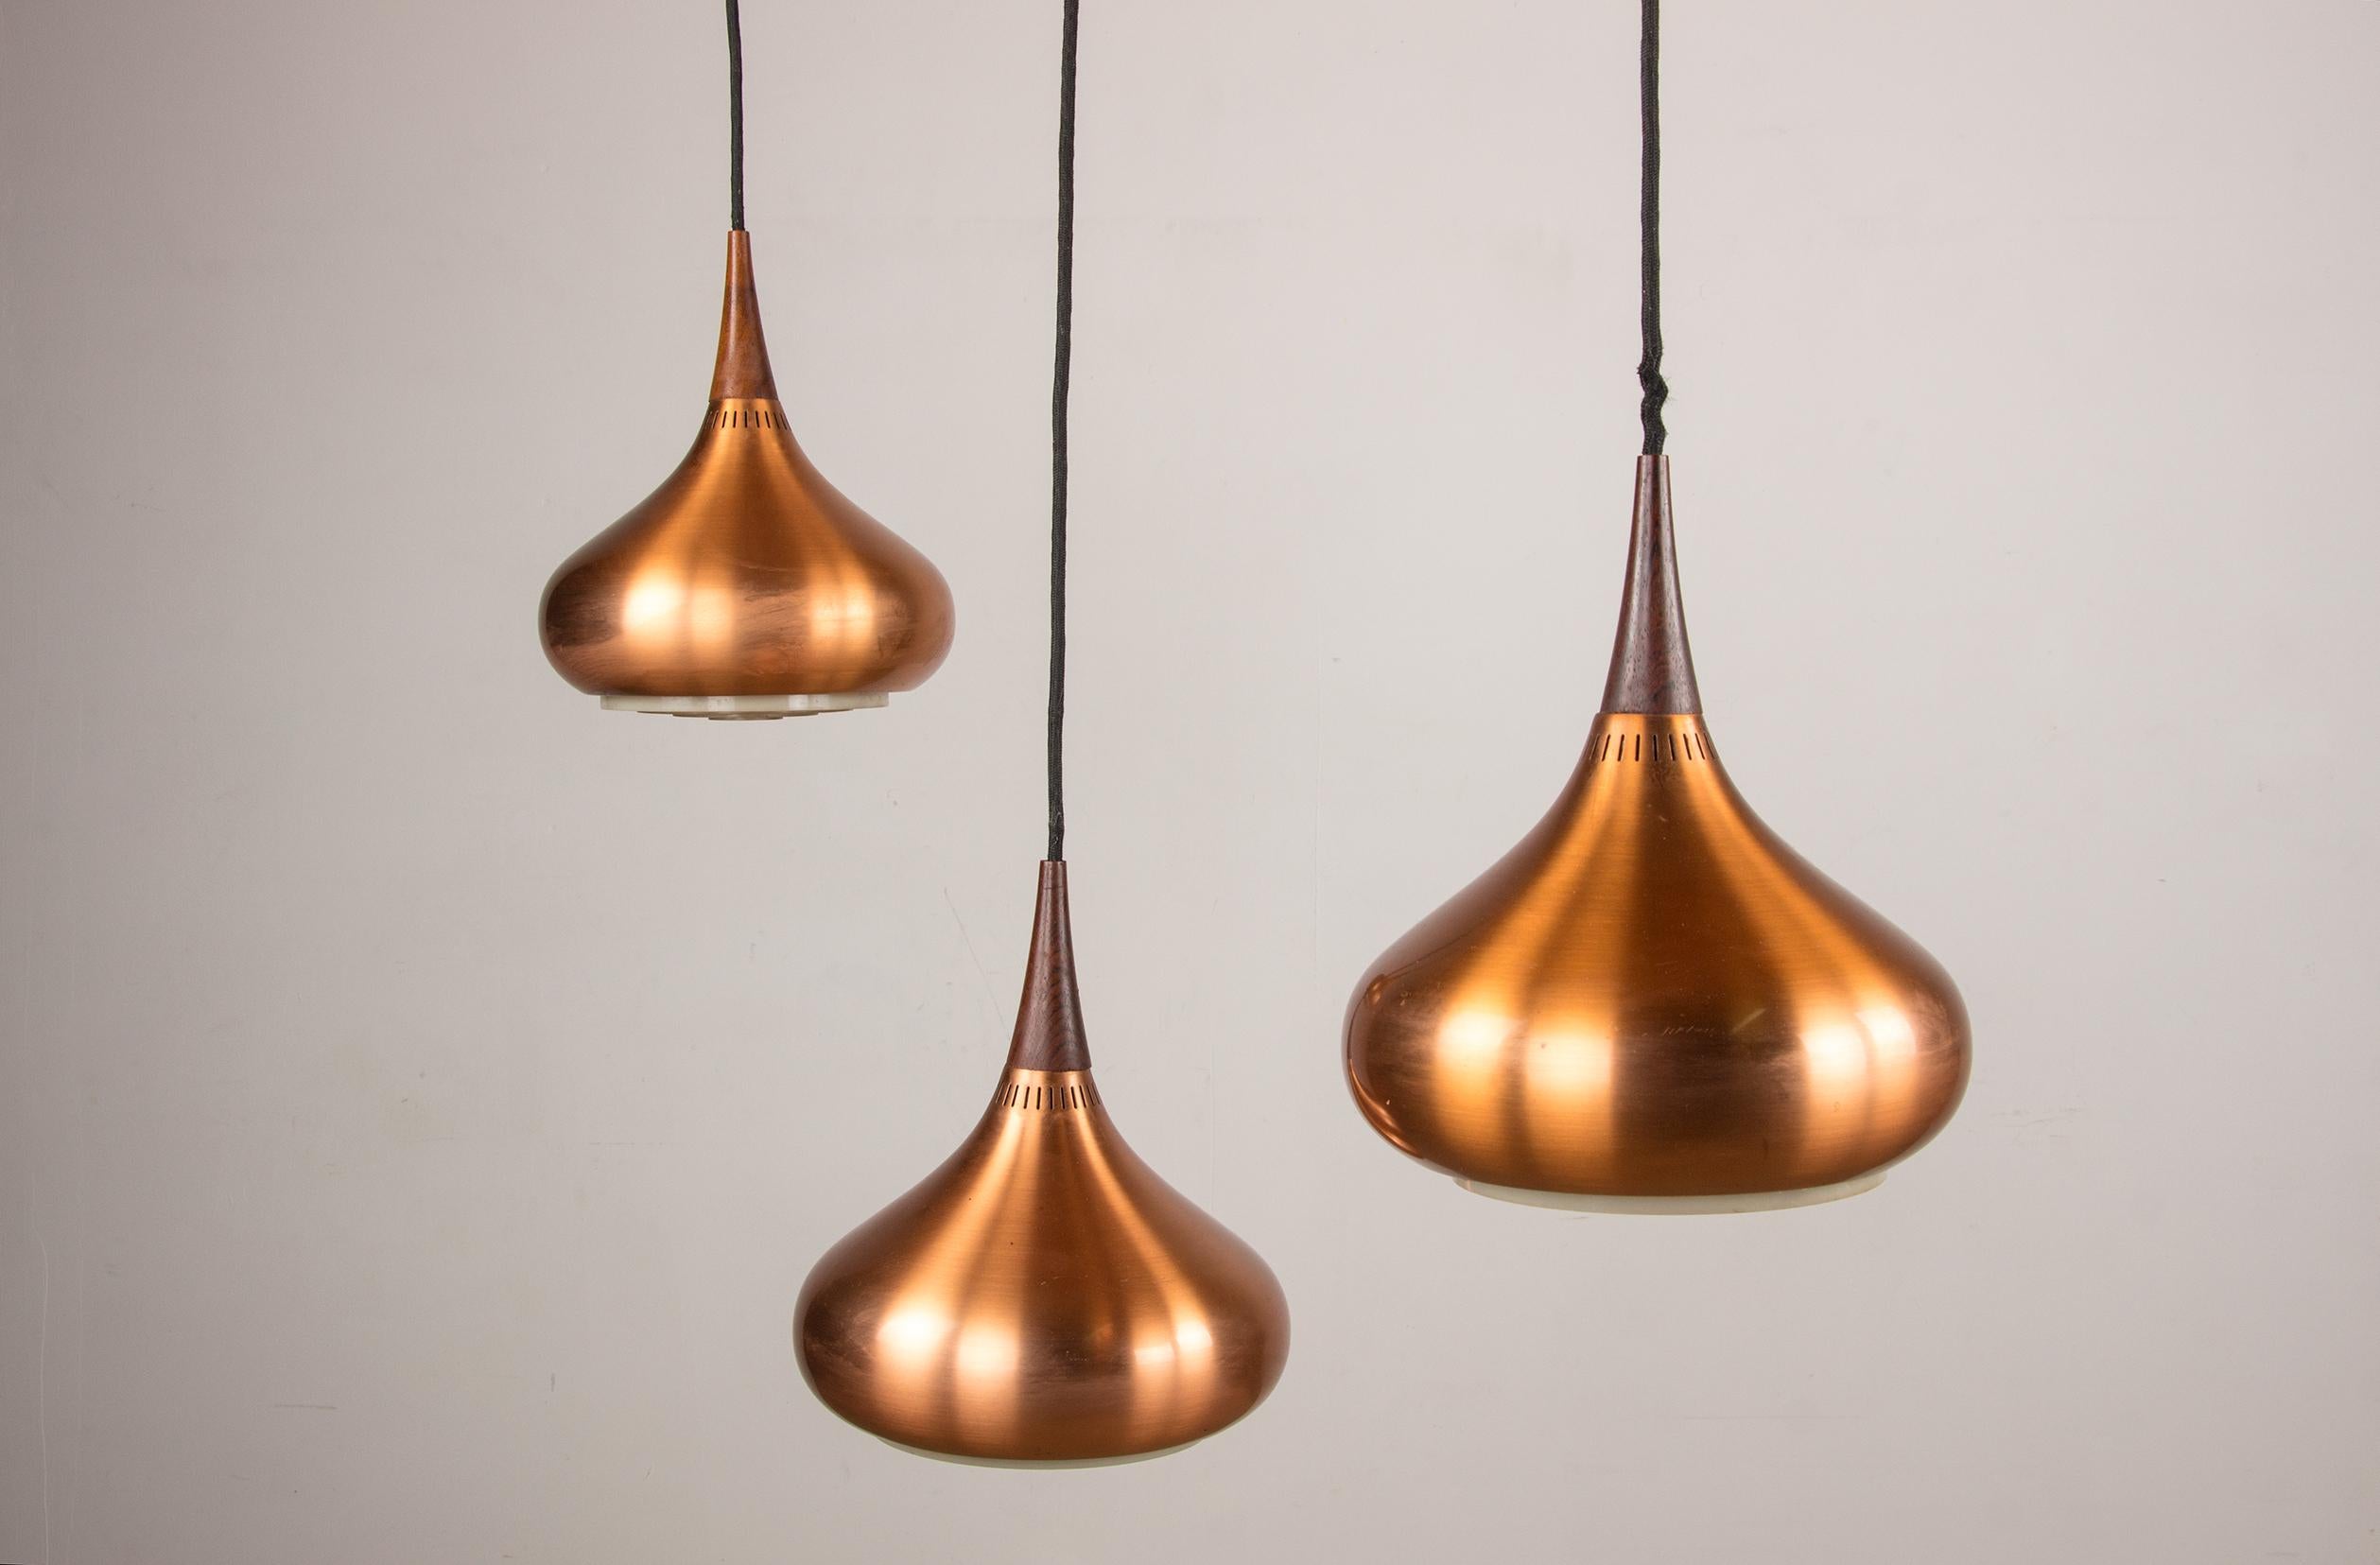 Magnificent large Scandinavian pendant light. 3 copper-plated metal bulbs each topped with a rosewood cone and connected above by a rosewood bar. Superb sober and elegant design. The whole thing is adjustable and adjustable in height to illuminate a